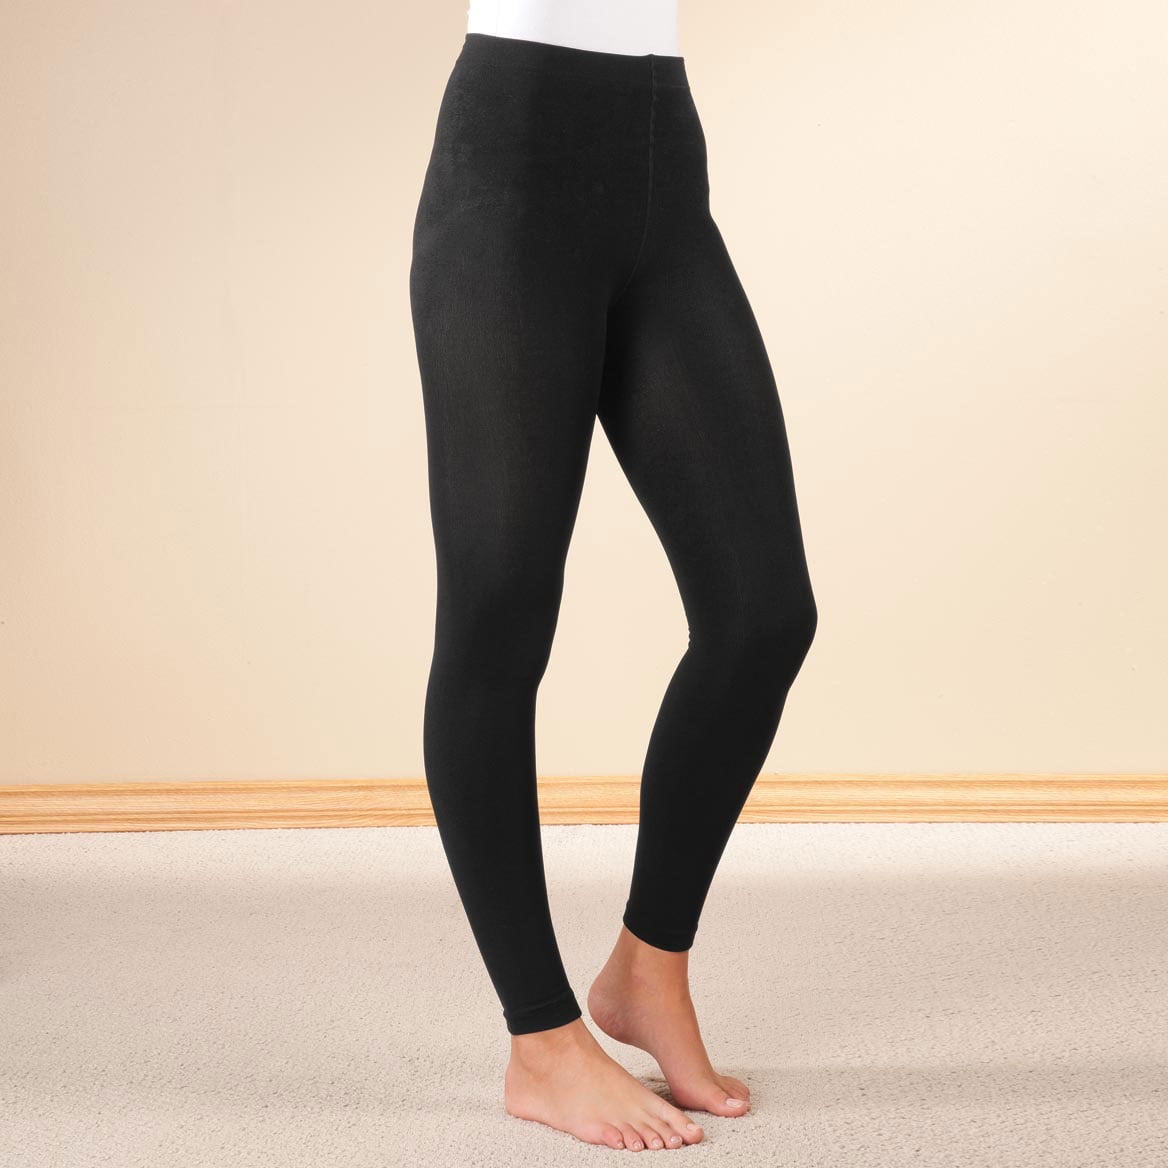 NexiEpoch Fleece Lined Leggings Women - High Waisted Winter Yoga Pants  Tummy Control Soft Thermal Warm for Hiking Workout